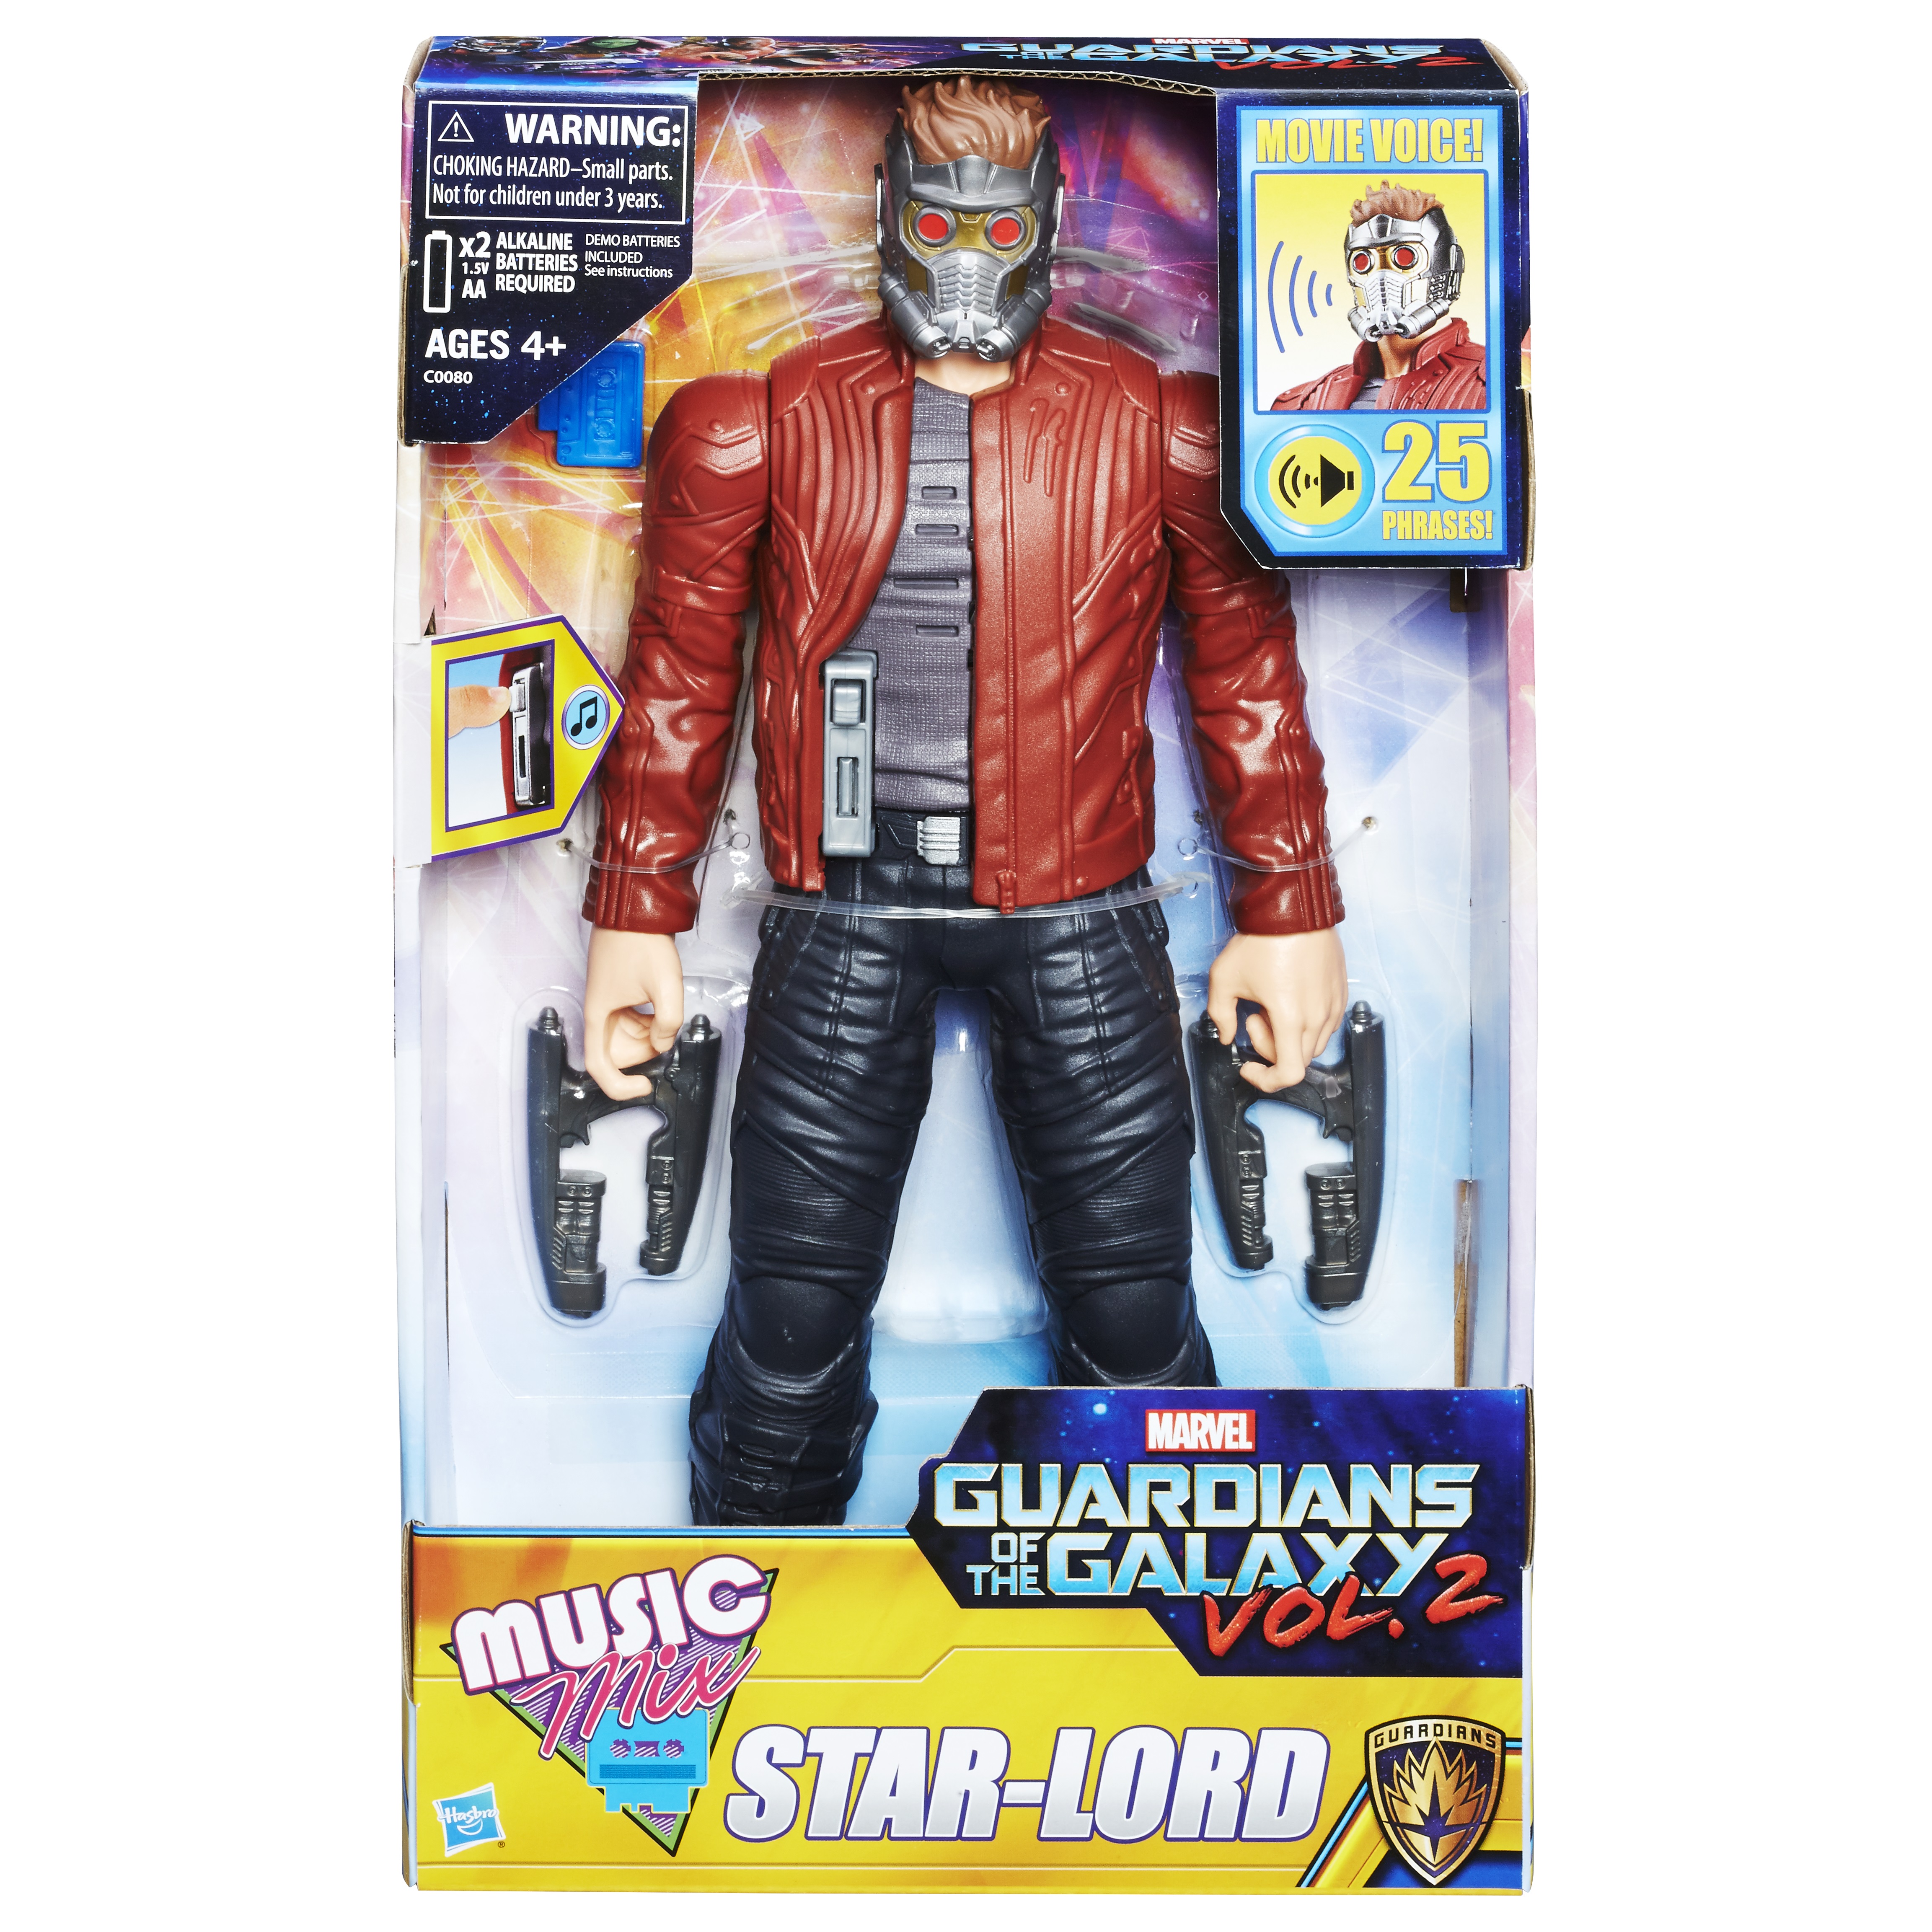 Hasbro Reveals Spring 2017 Lineup of Guardians of the Galaxy Toys 